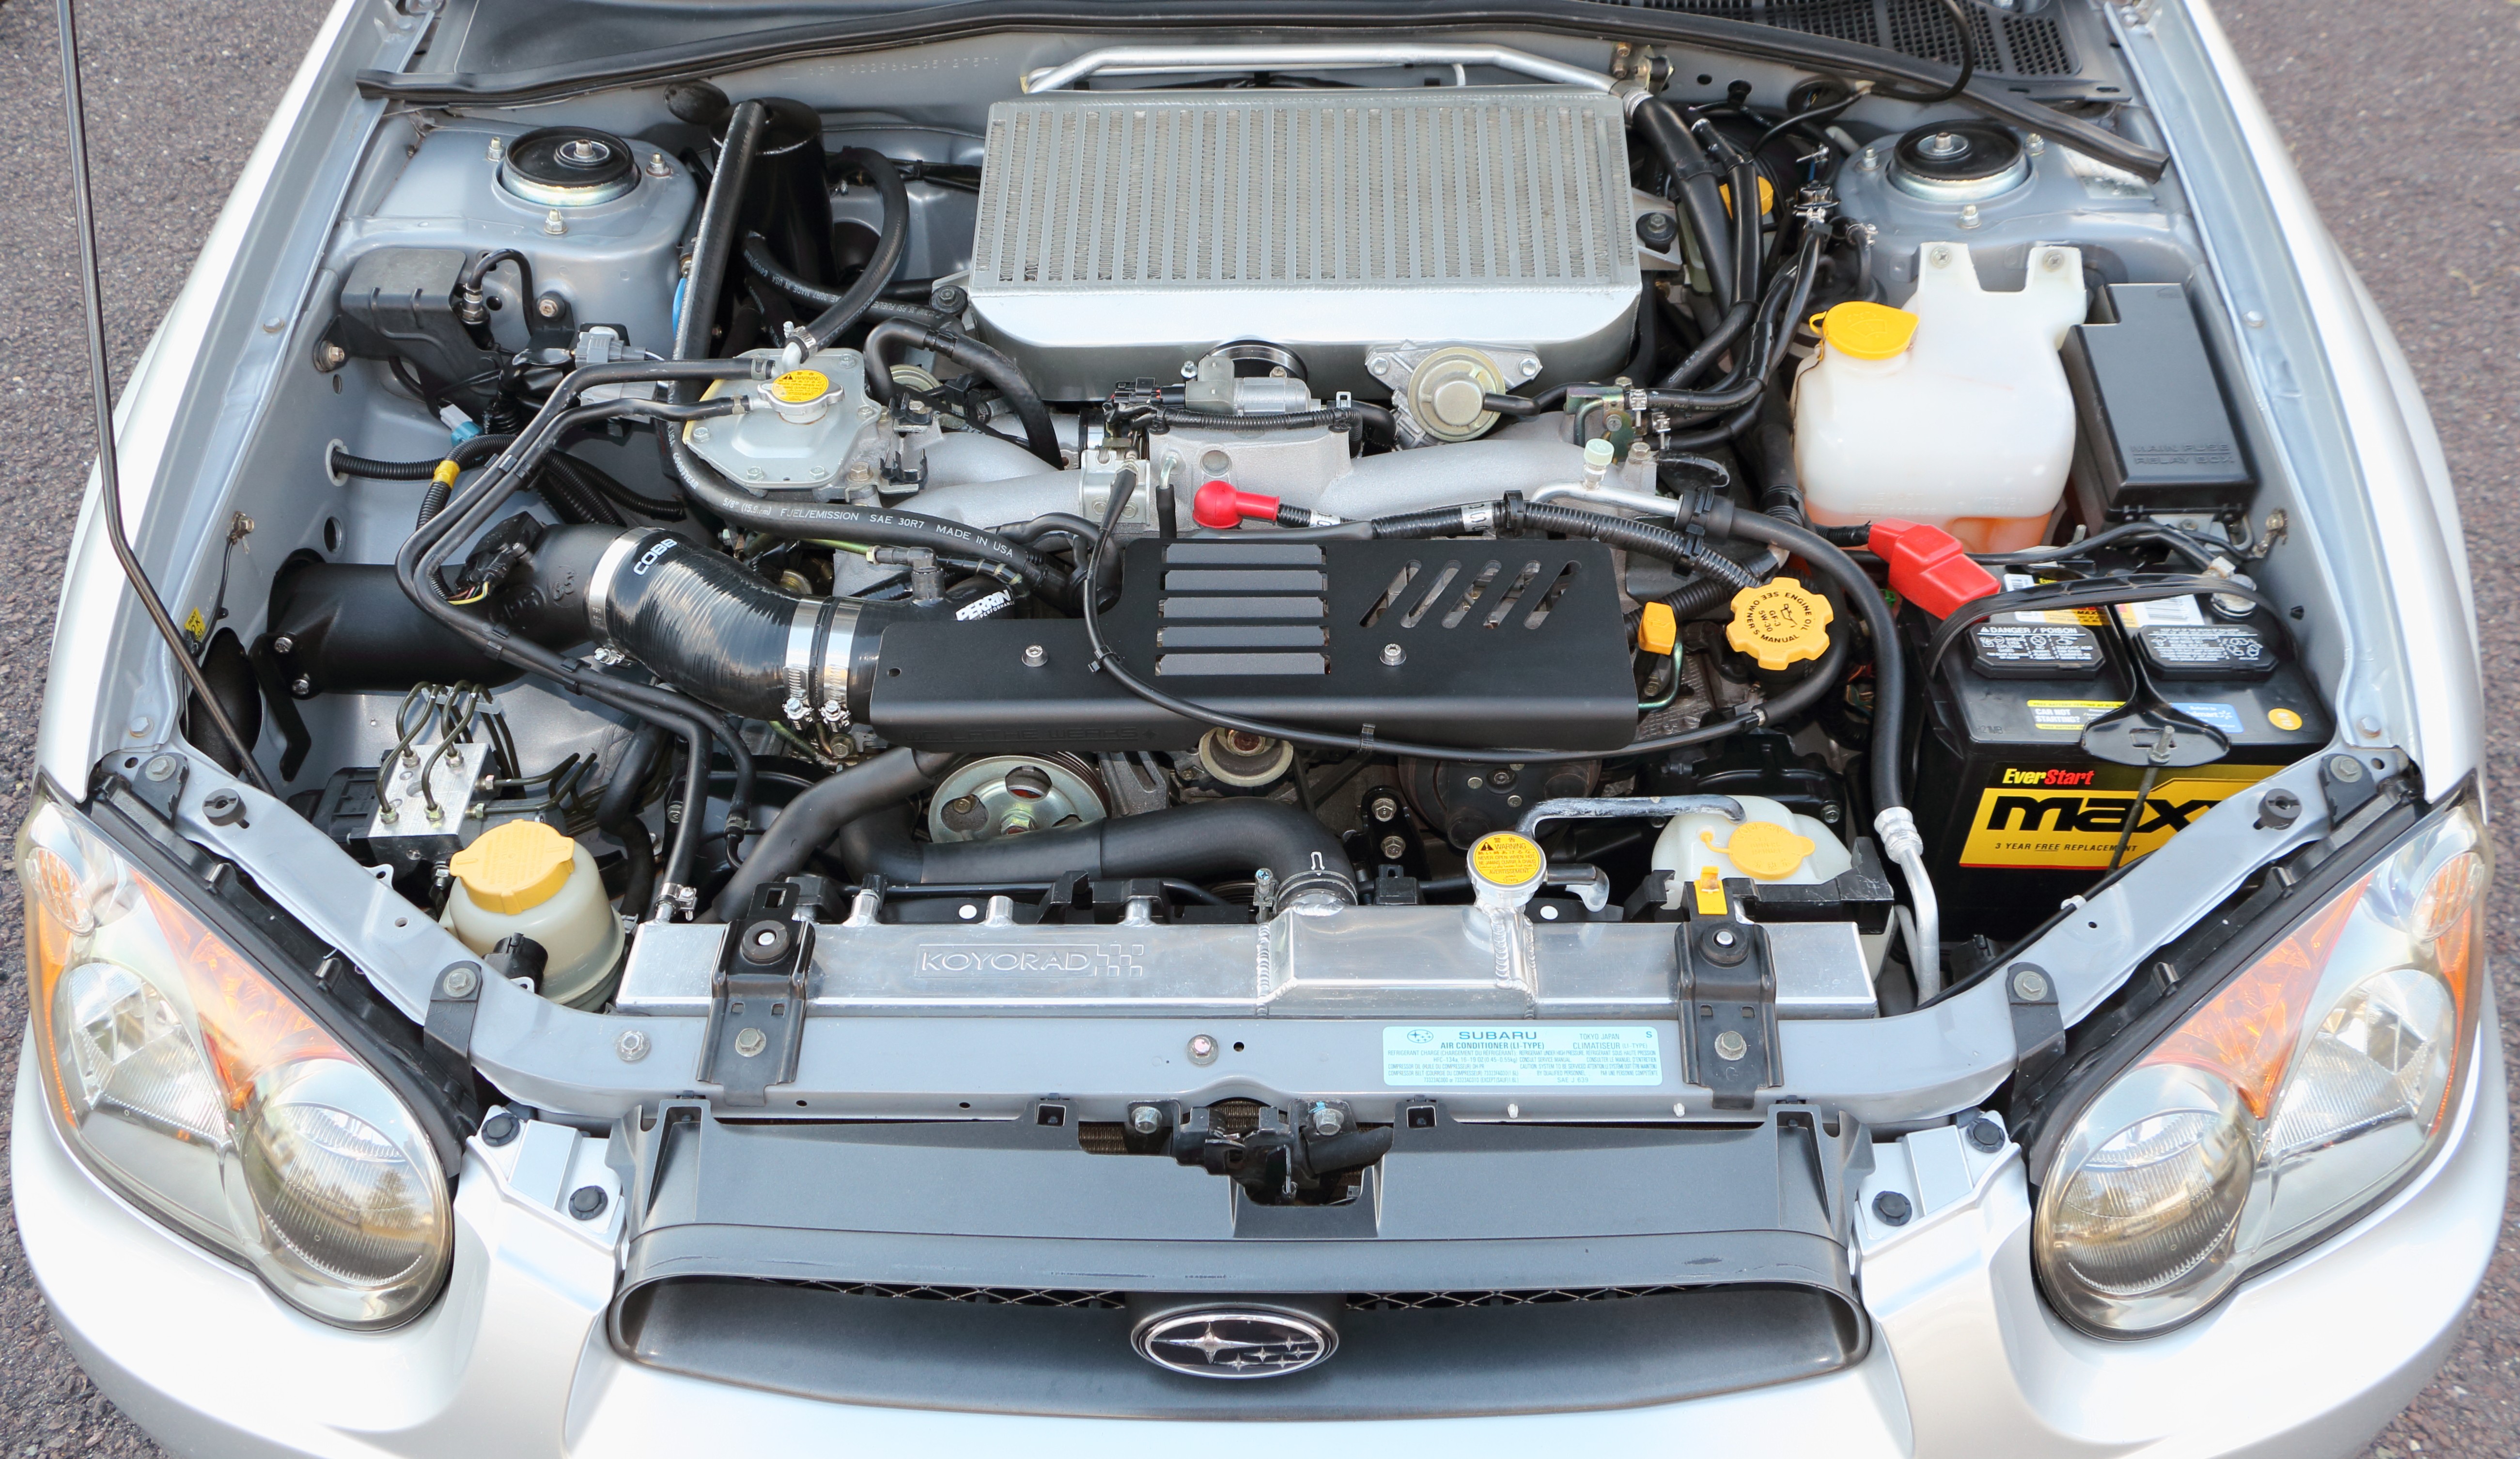 Wrx Engine Bay Diagram How to Safely Clean An Engine Bay Of Wrx Engine...